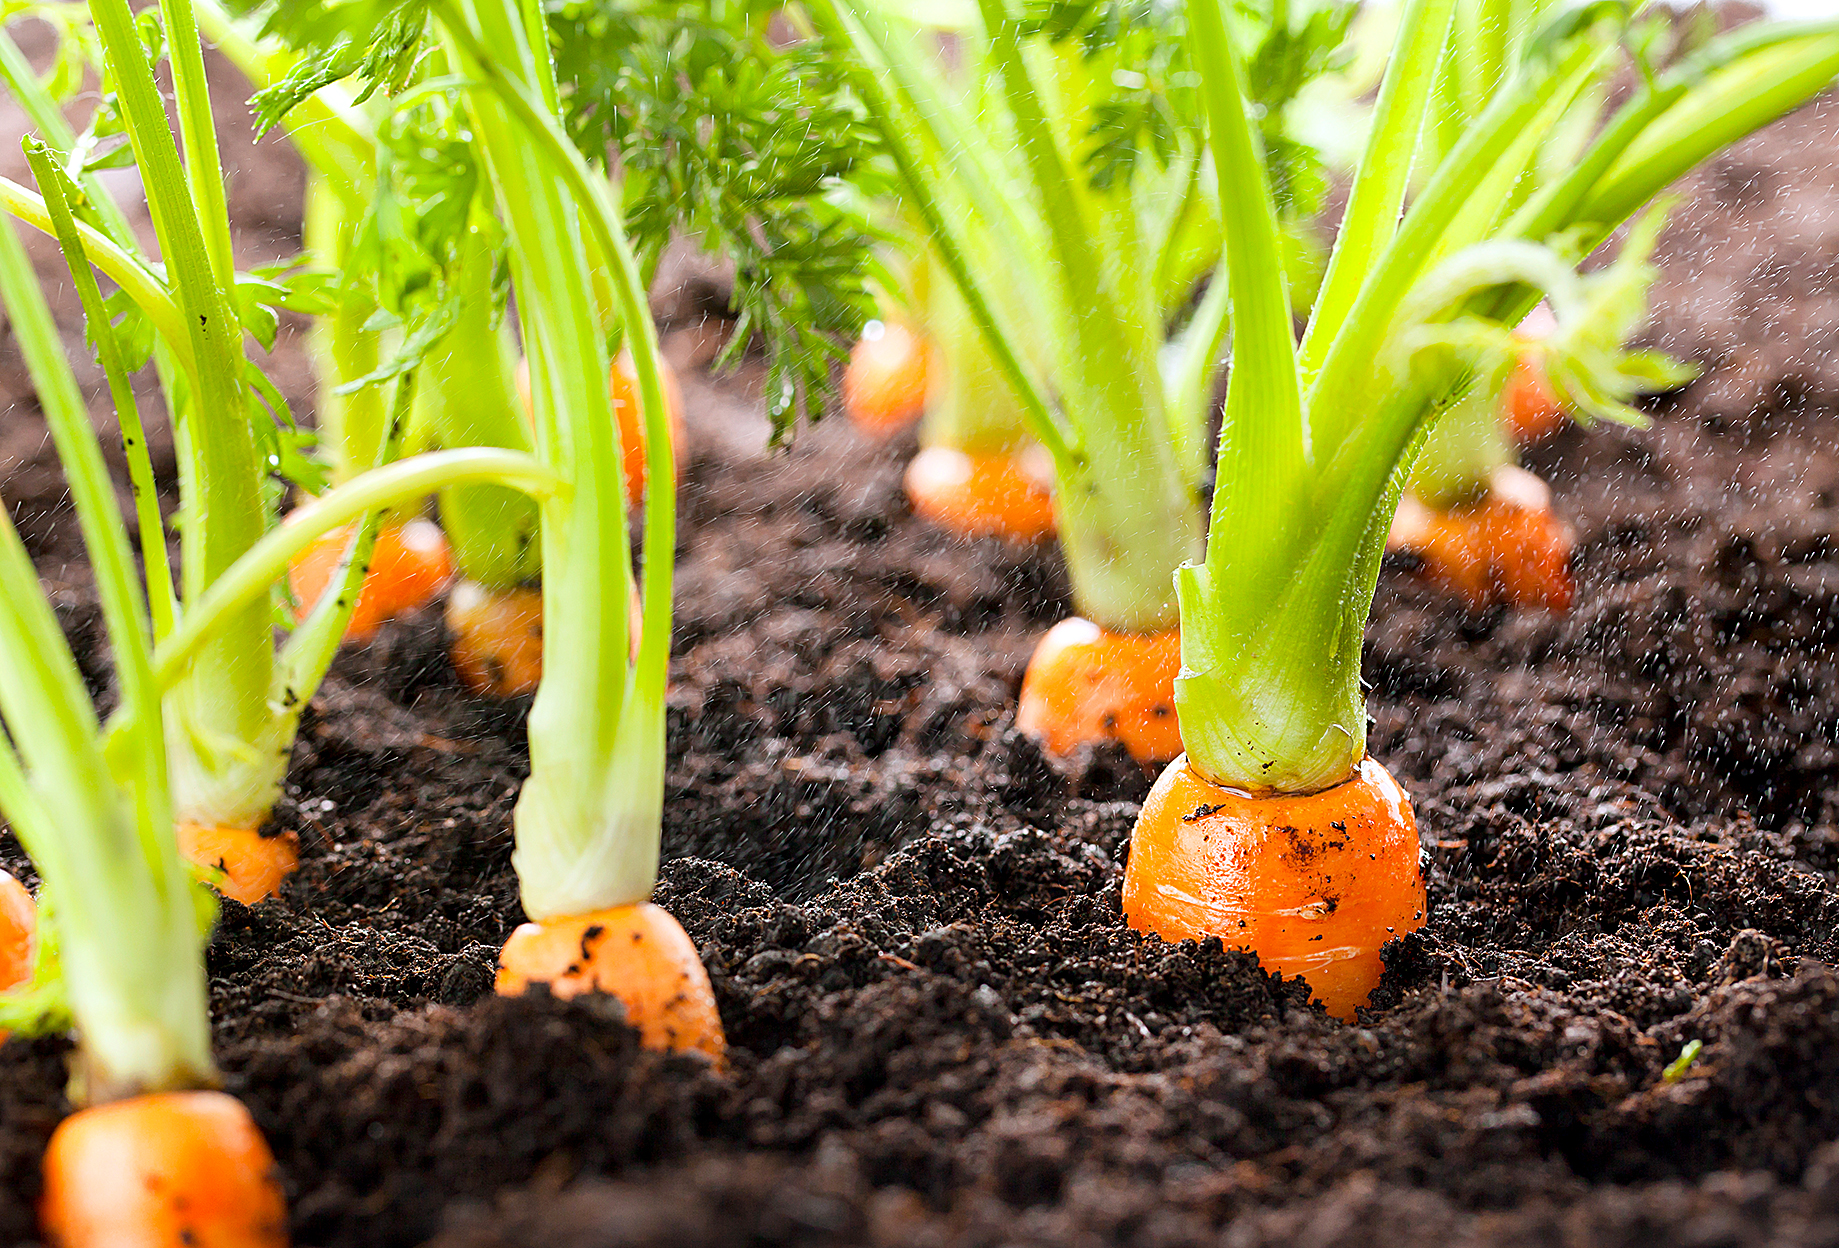 Carrot vegetable grows in the garden in the soil organic background closeup